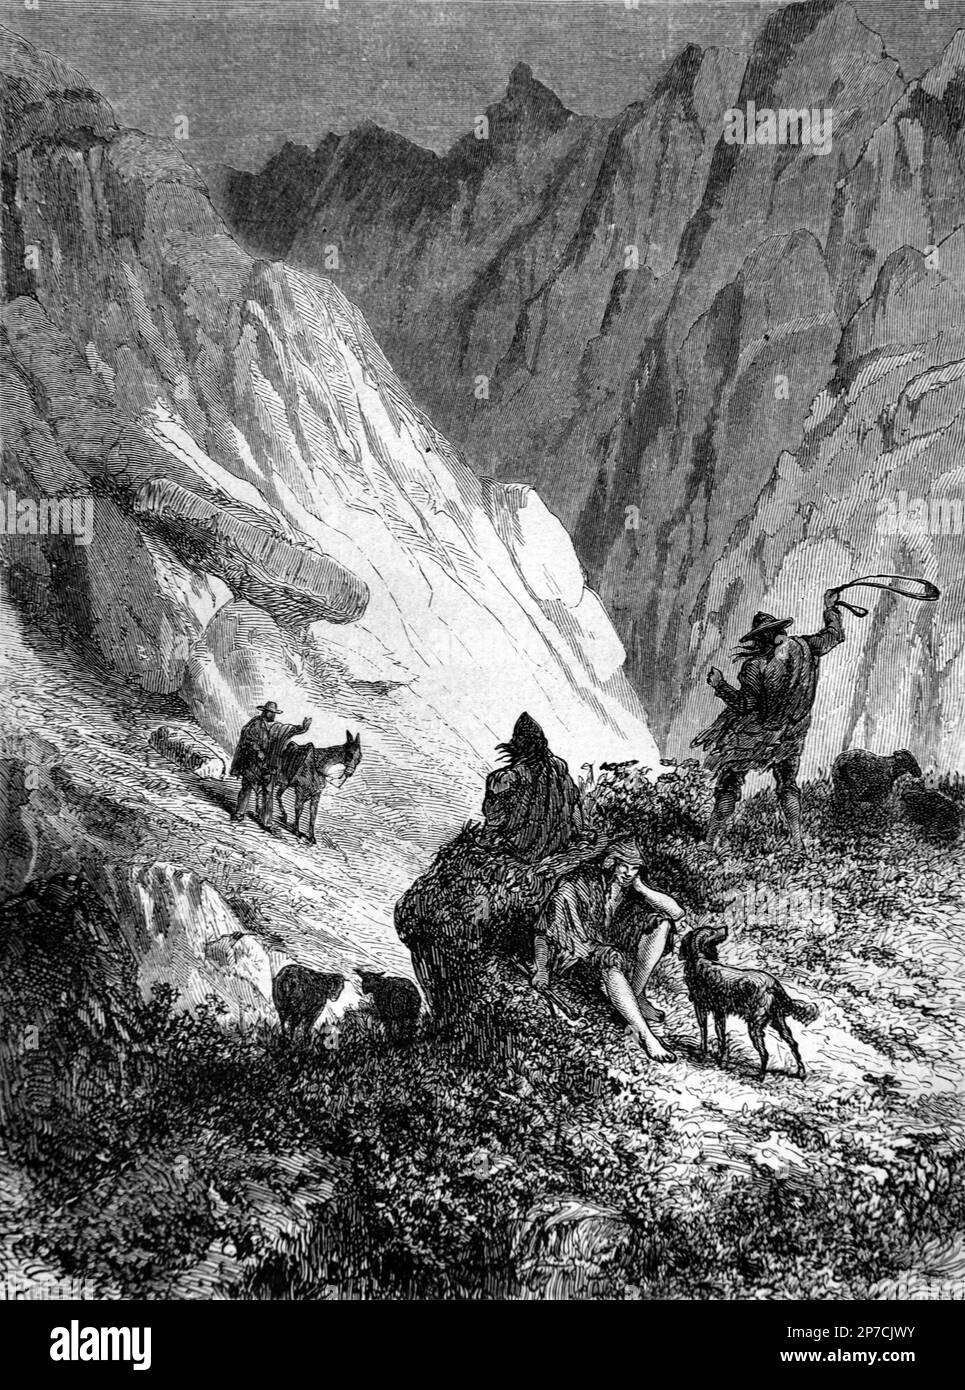 Shepherd or Herders in the Andes, Altiplano, Collao or Andean Plateau of West-Central South America. Vintage Engraving or Illustration 1862 Stock Photo